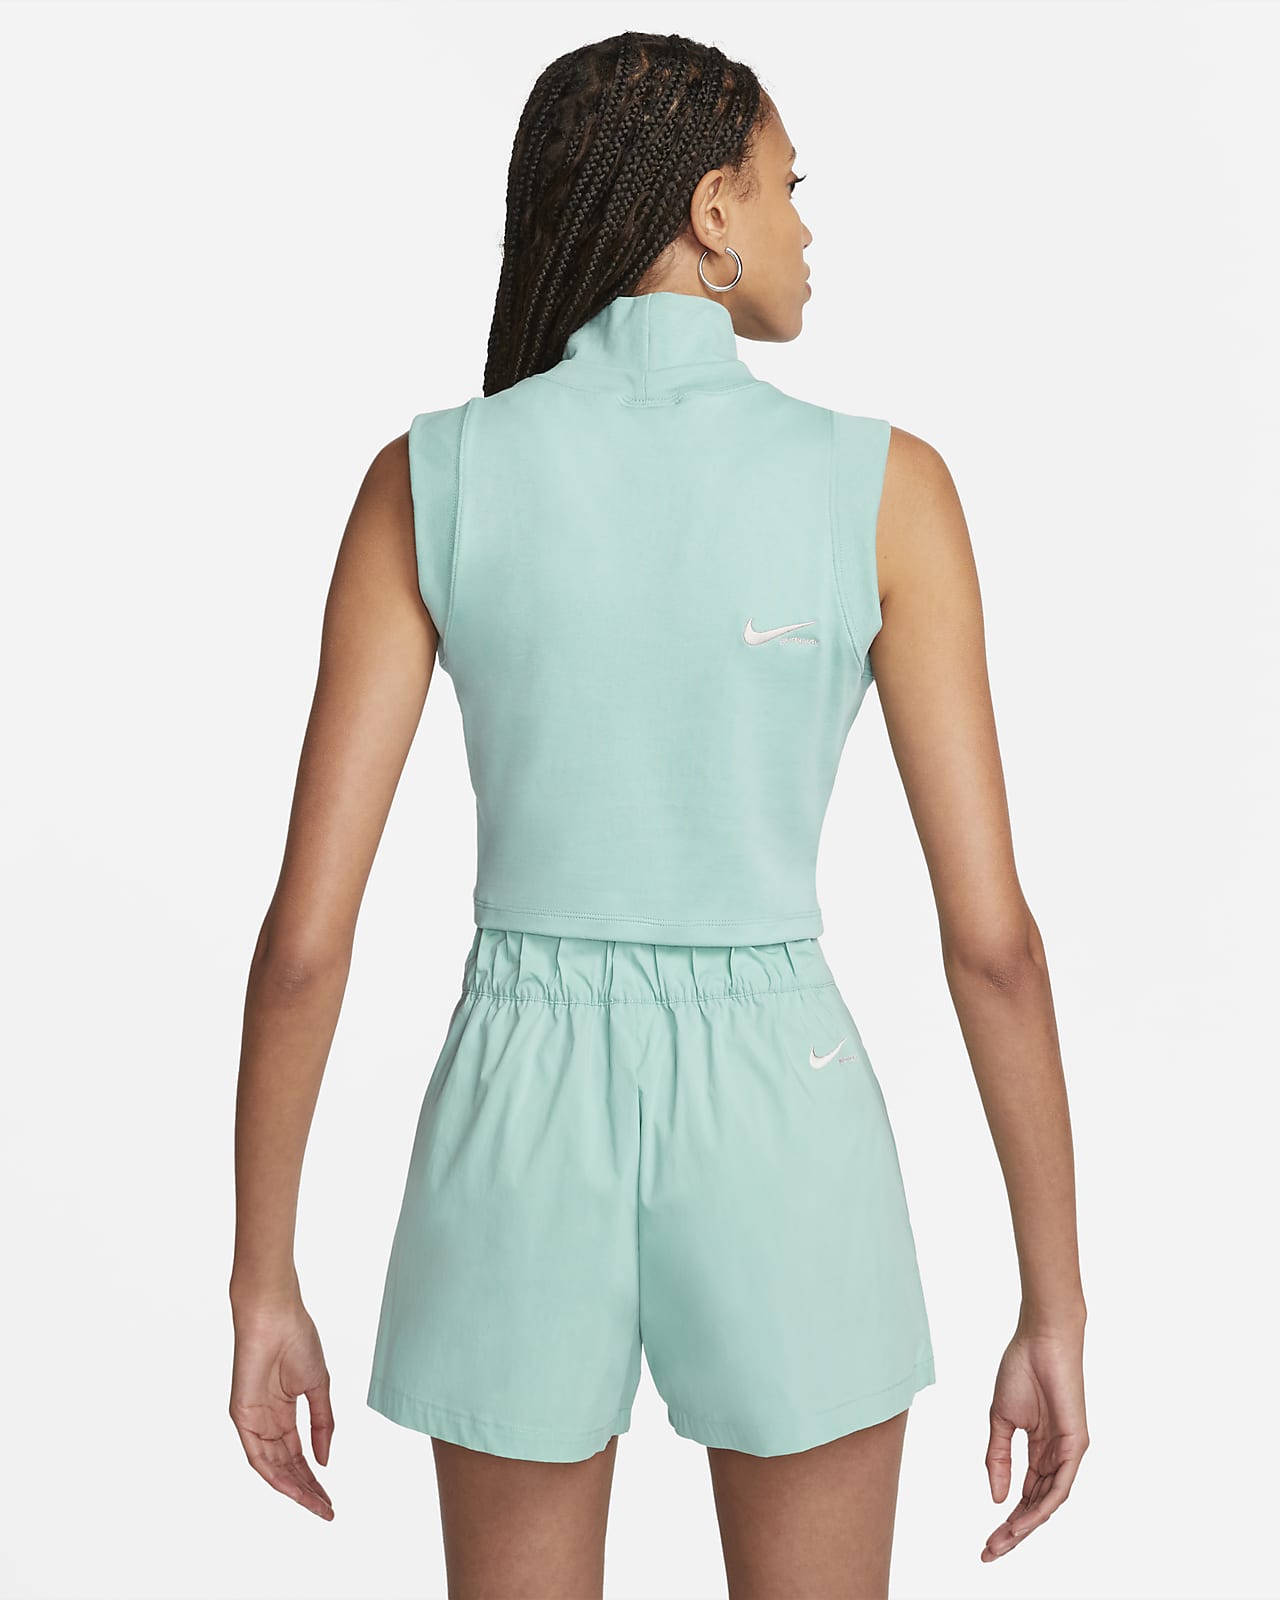 https://static.nike.com/a/images/t_PDP_1280_v1/f_auto,q_auto:eco/8ab0592b-c375-44af-a9ca-4c809ecc6b05/sportswear-collection-womens-mock-neck-cropped-tank-NHbLf5.png